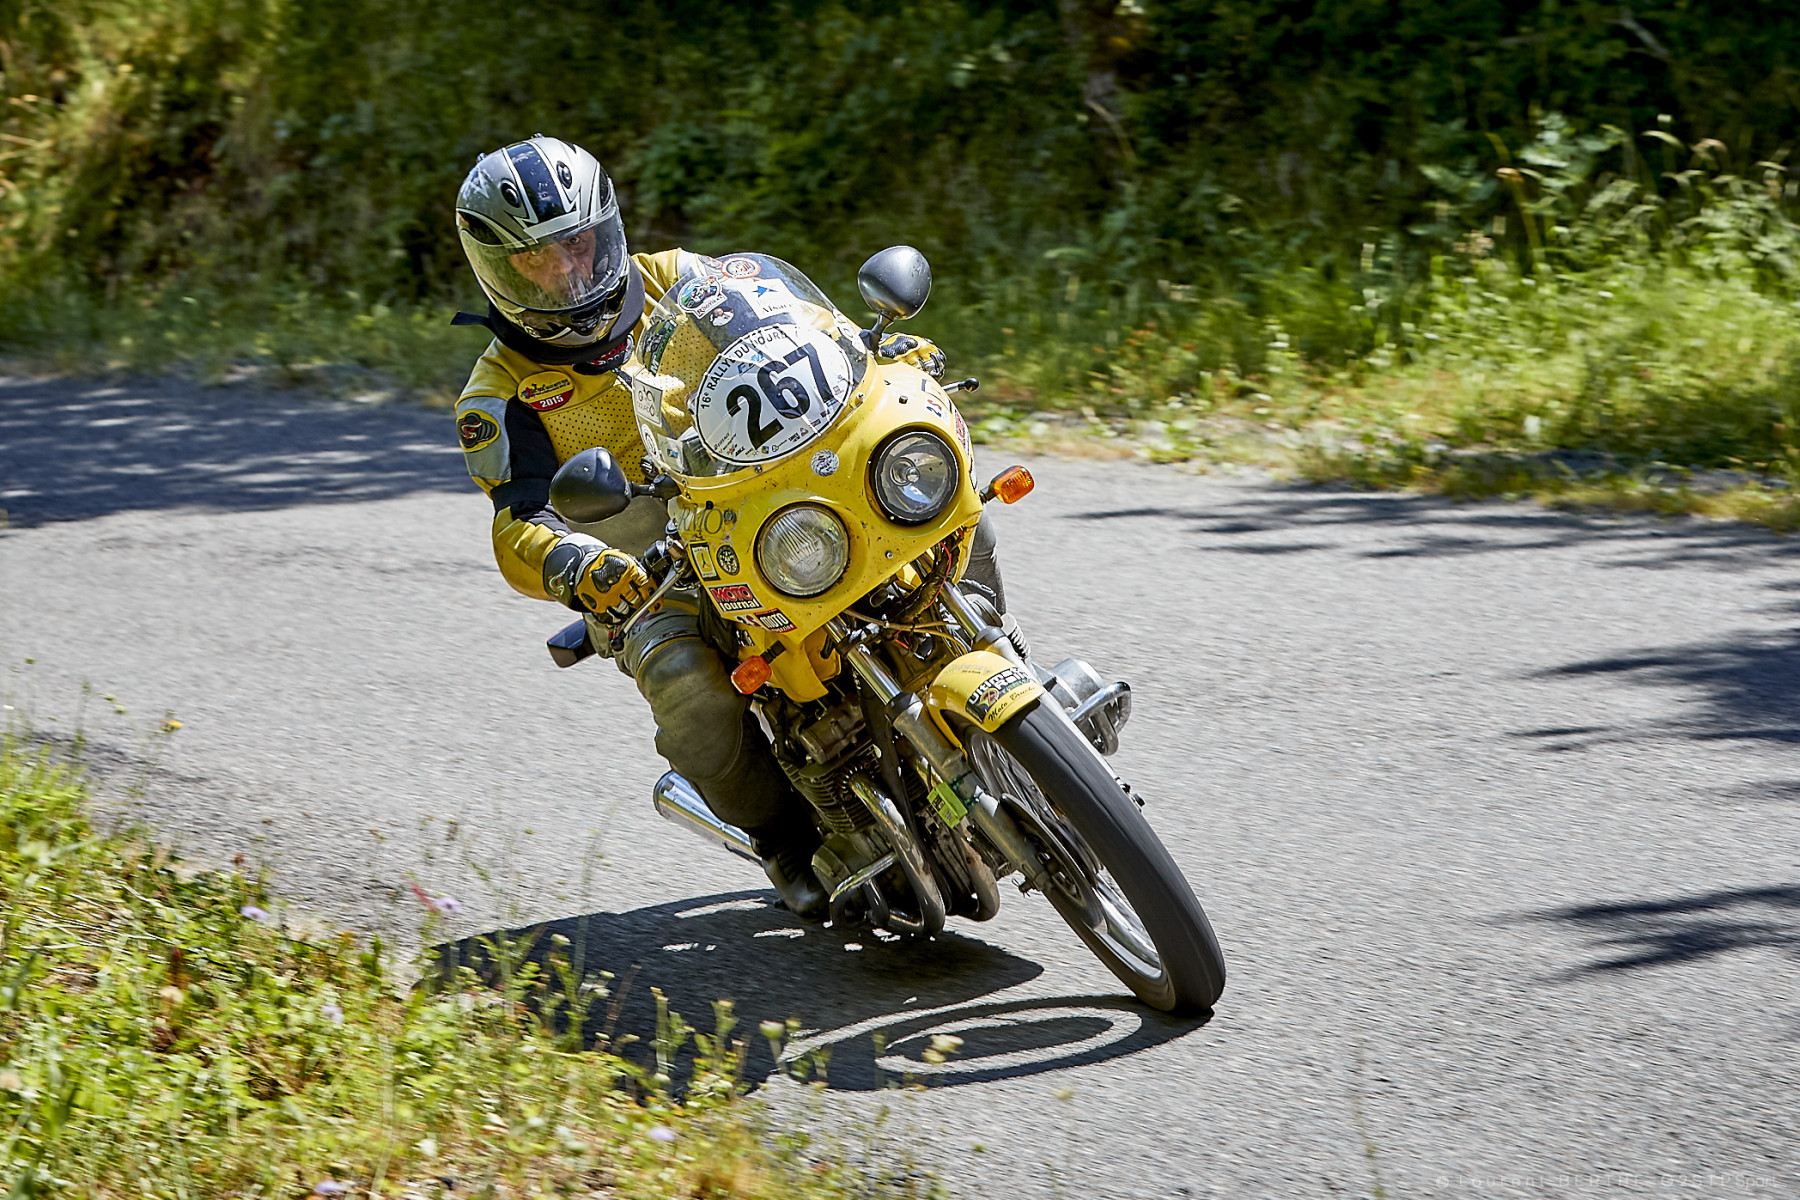 Compter en images... MOTO - Page 6 267-Eric-MARTIN-20190713-_MG_9488